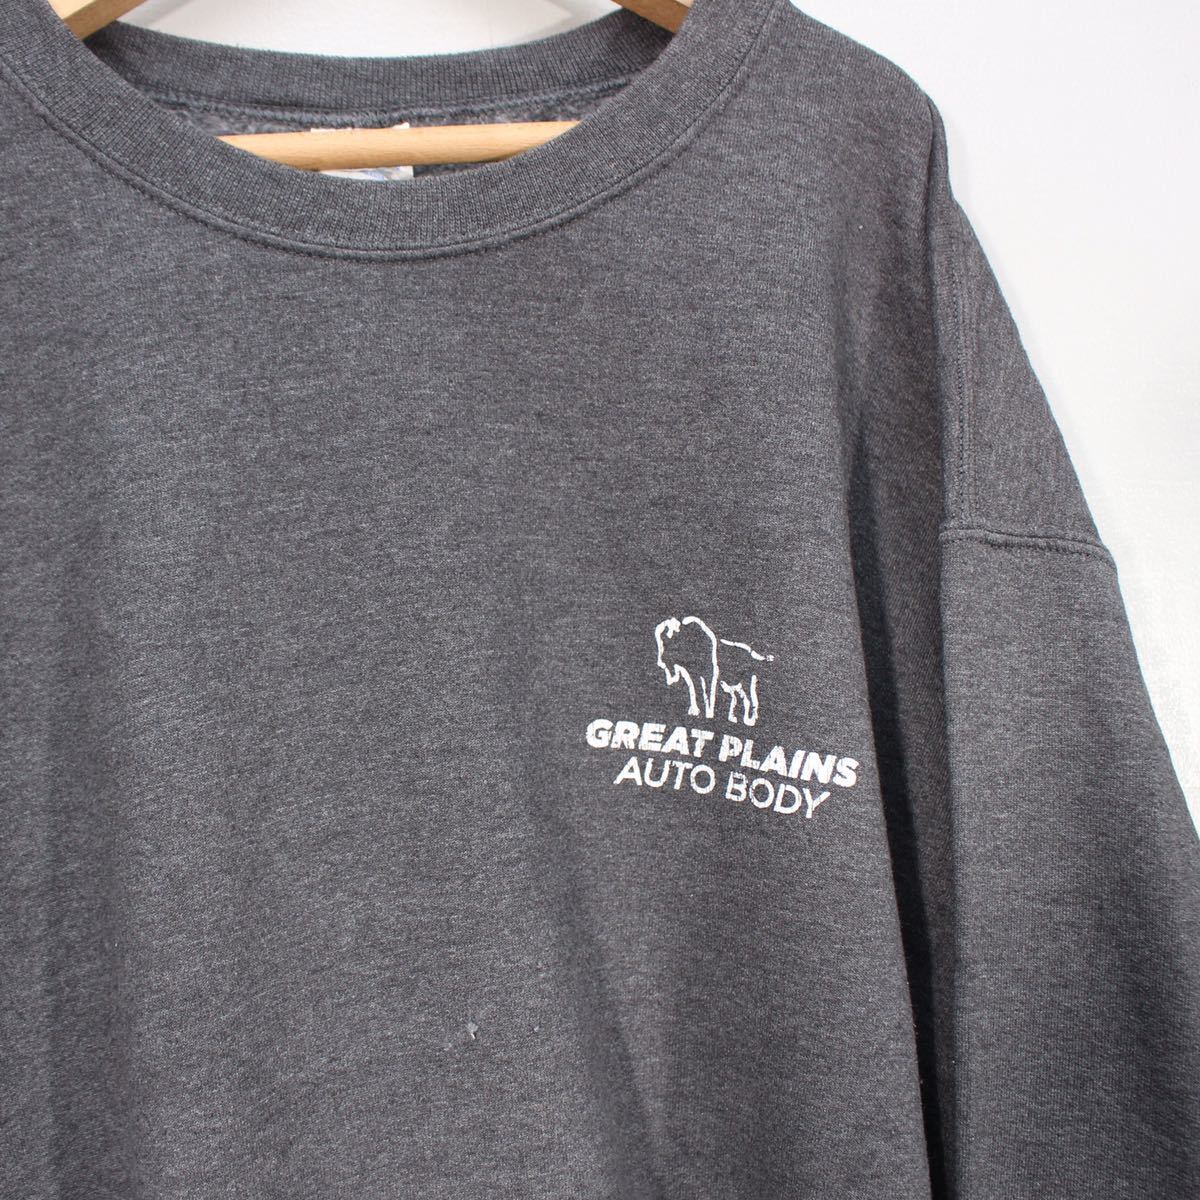 USA VINTAGE ONE POINT DESIGN OVER SWEAT SHIRT/アメリカ古着ワン